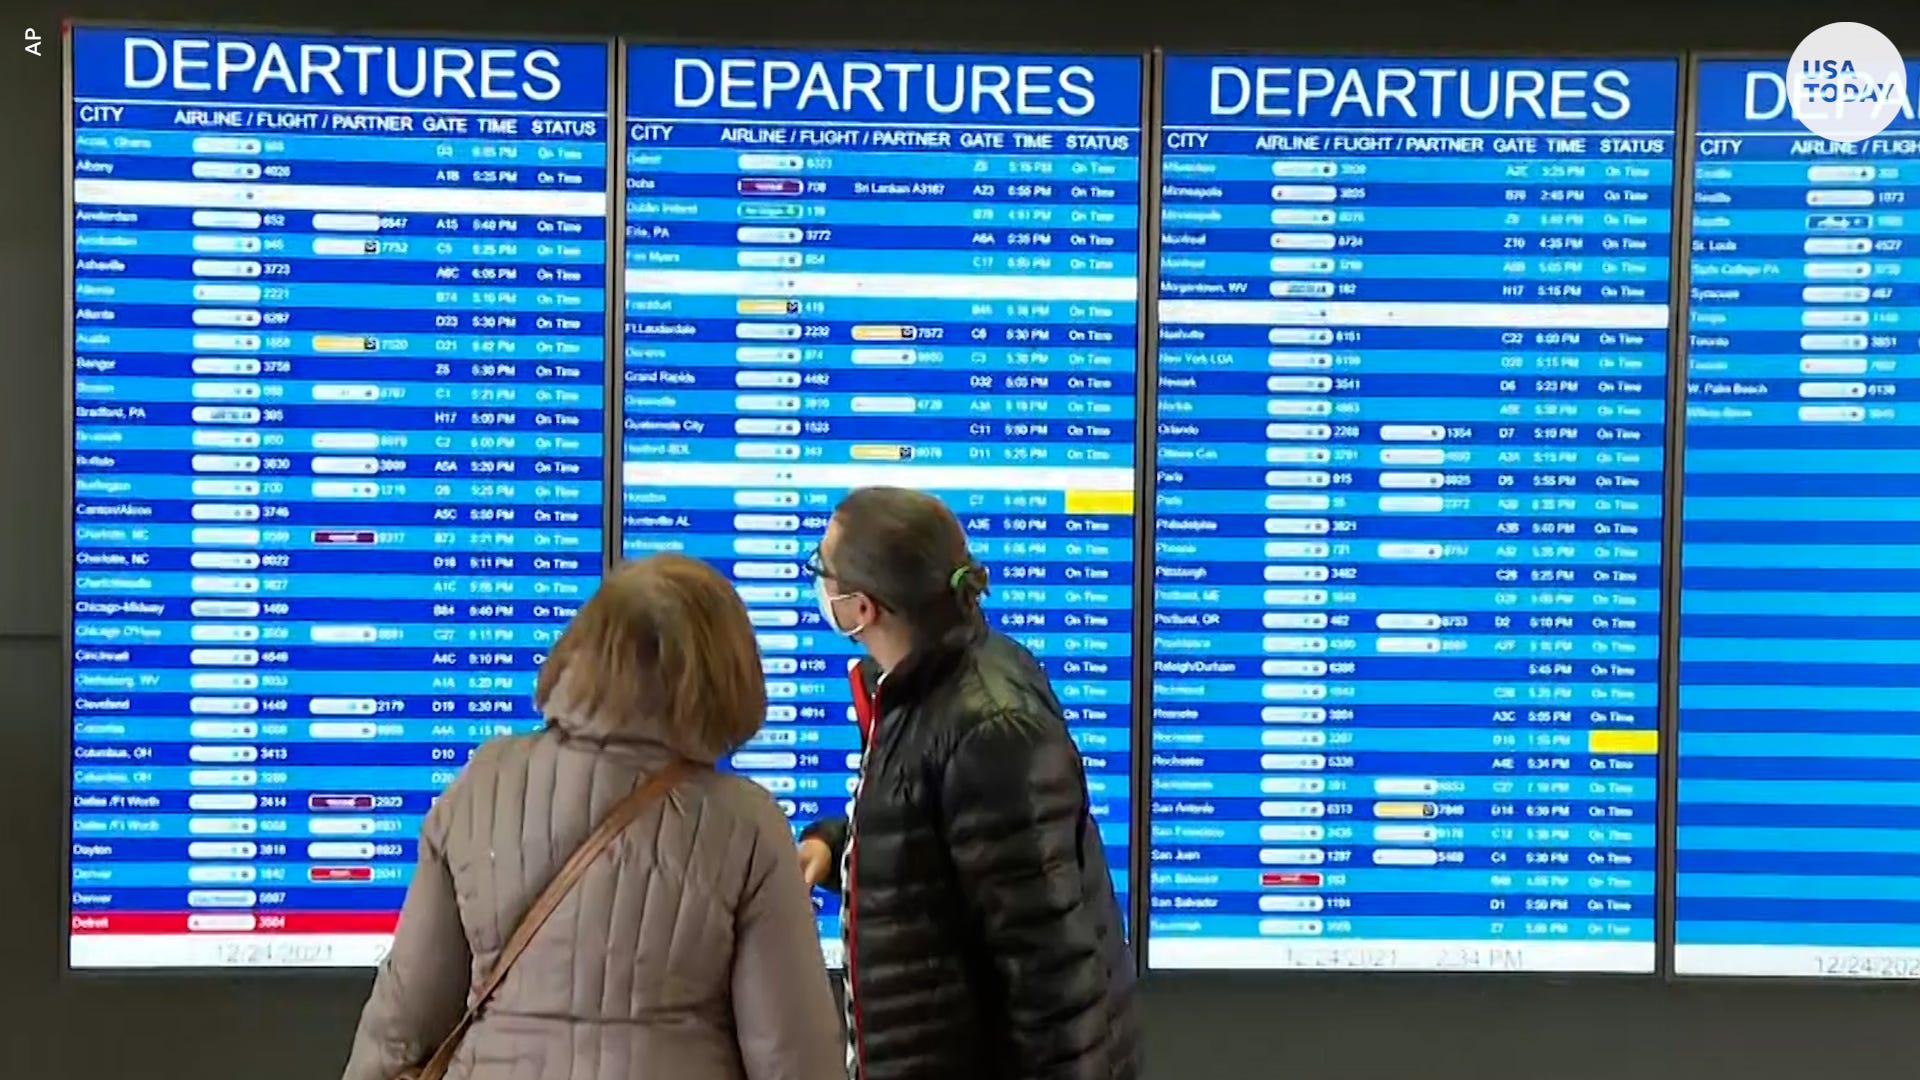 Over 1,400 flight cancellations Thursday: Are cancellations, delays the new normal this winter? thumbnail